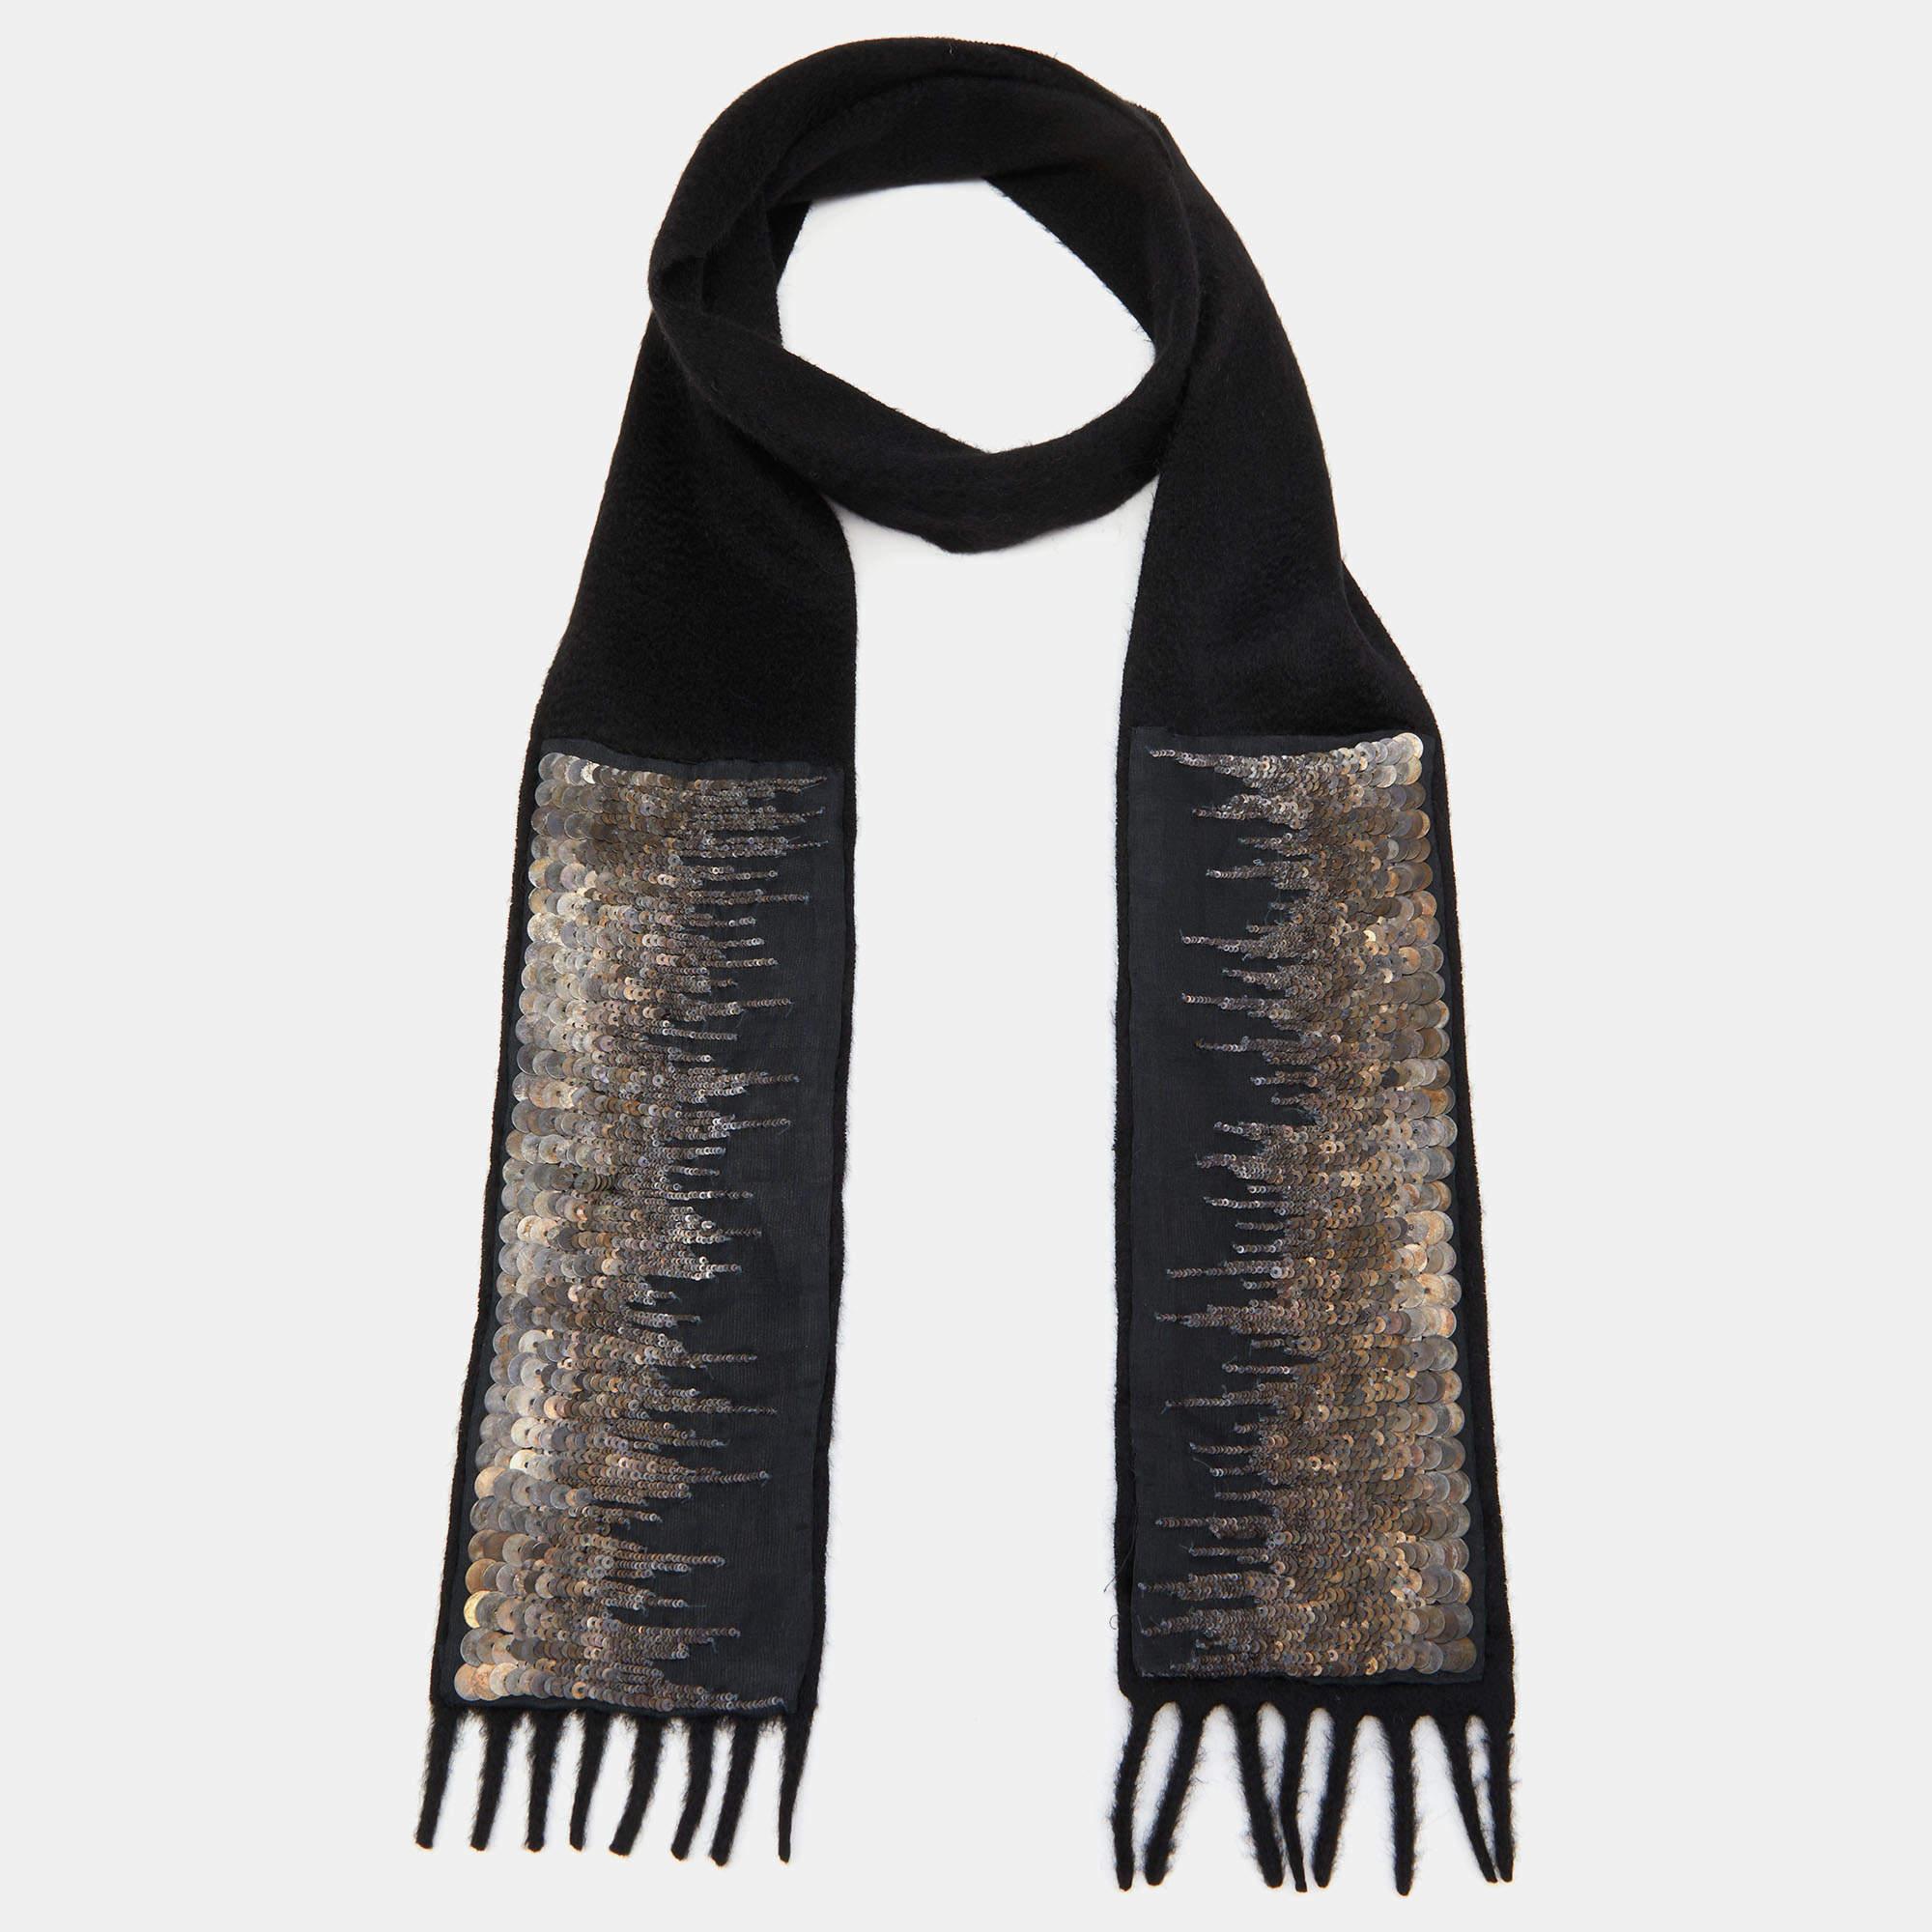 Prada designed this scarf with intricate details on cashmere. It has sequin embellishments and fringe edges. Style it around your neck.

Includes: Price Tag
